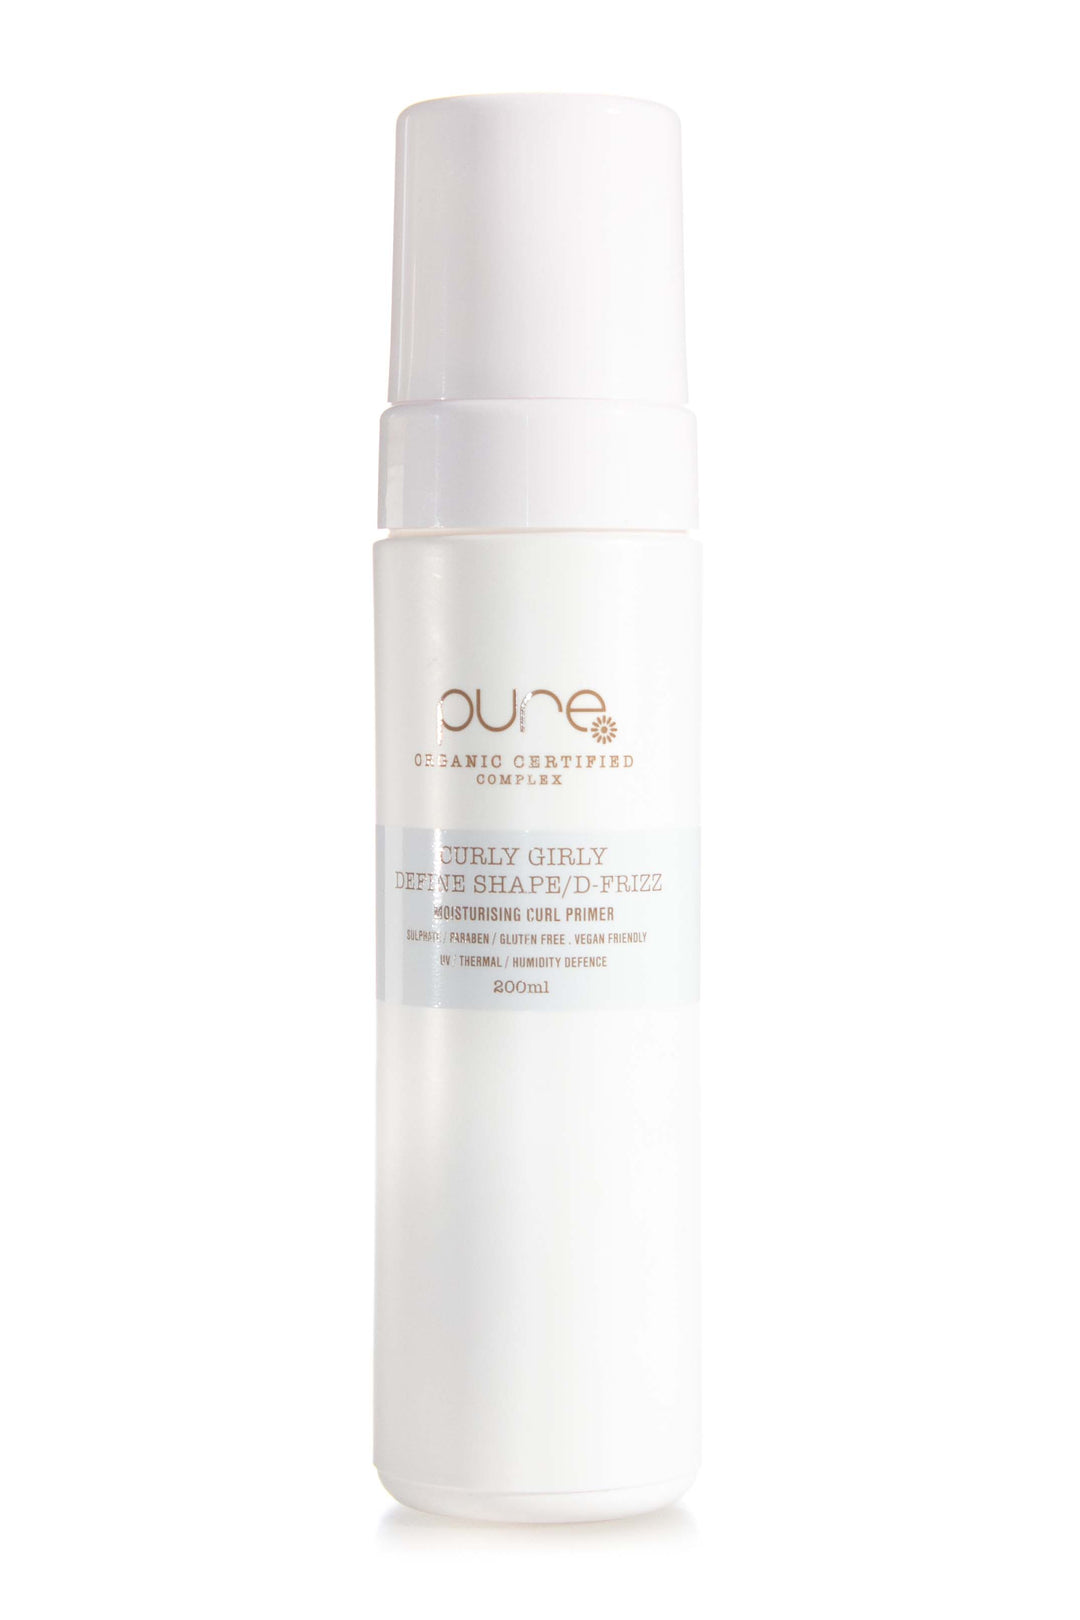 pure-curly-girly-200ml